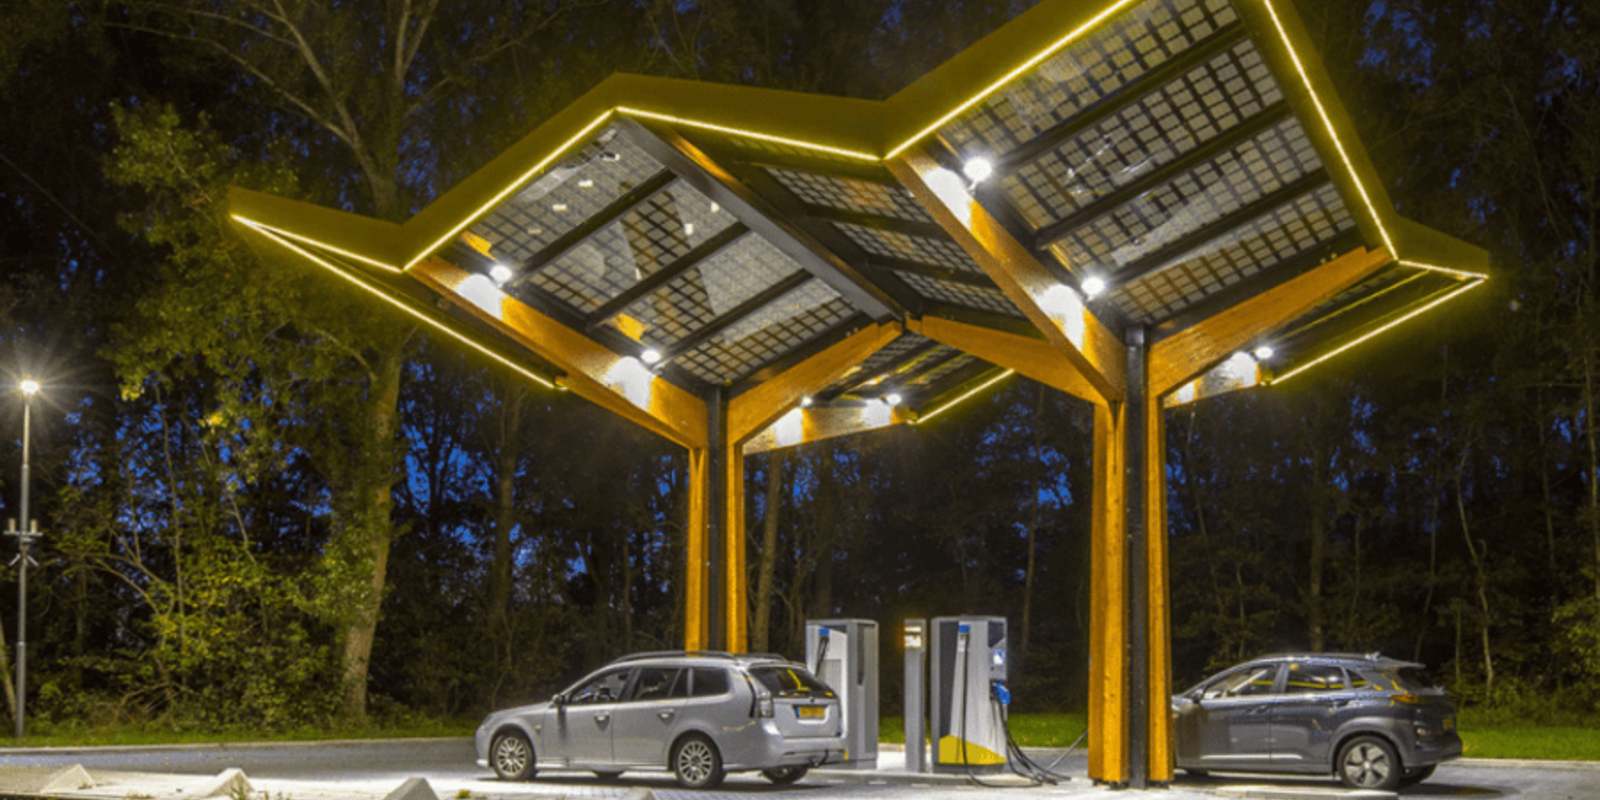 EnergyAustralia’s role in accelerating the green transport revolution – we're doing it